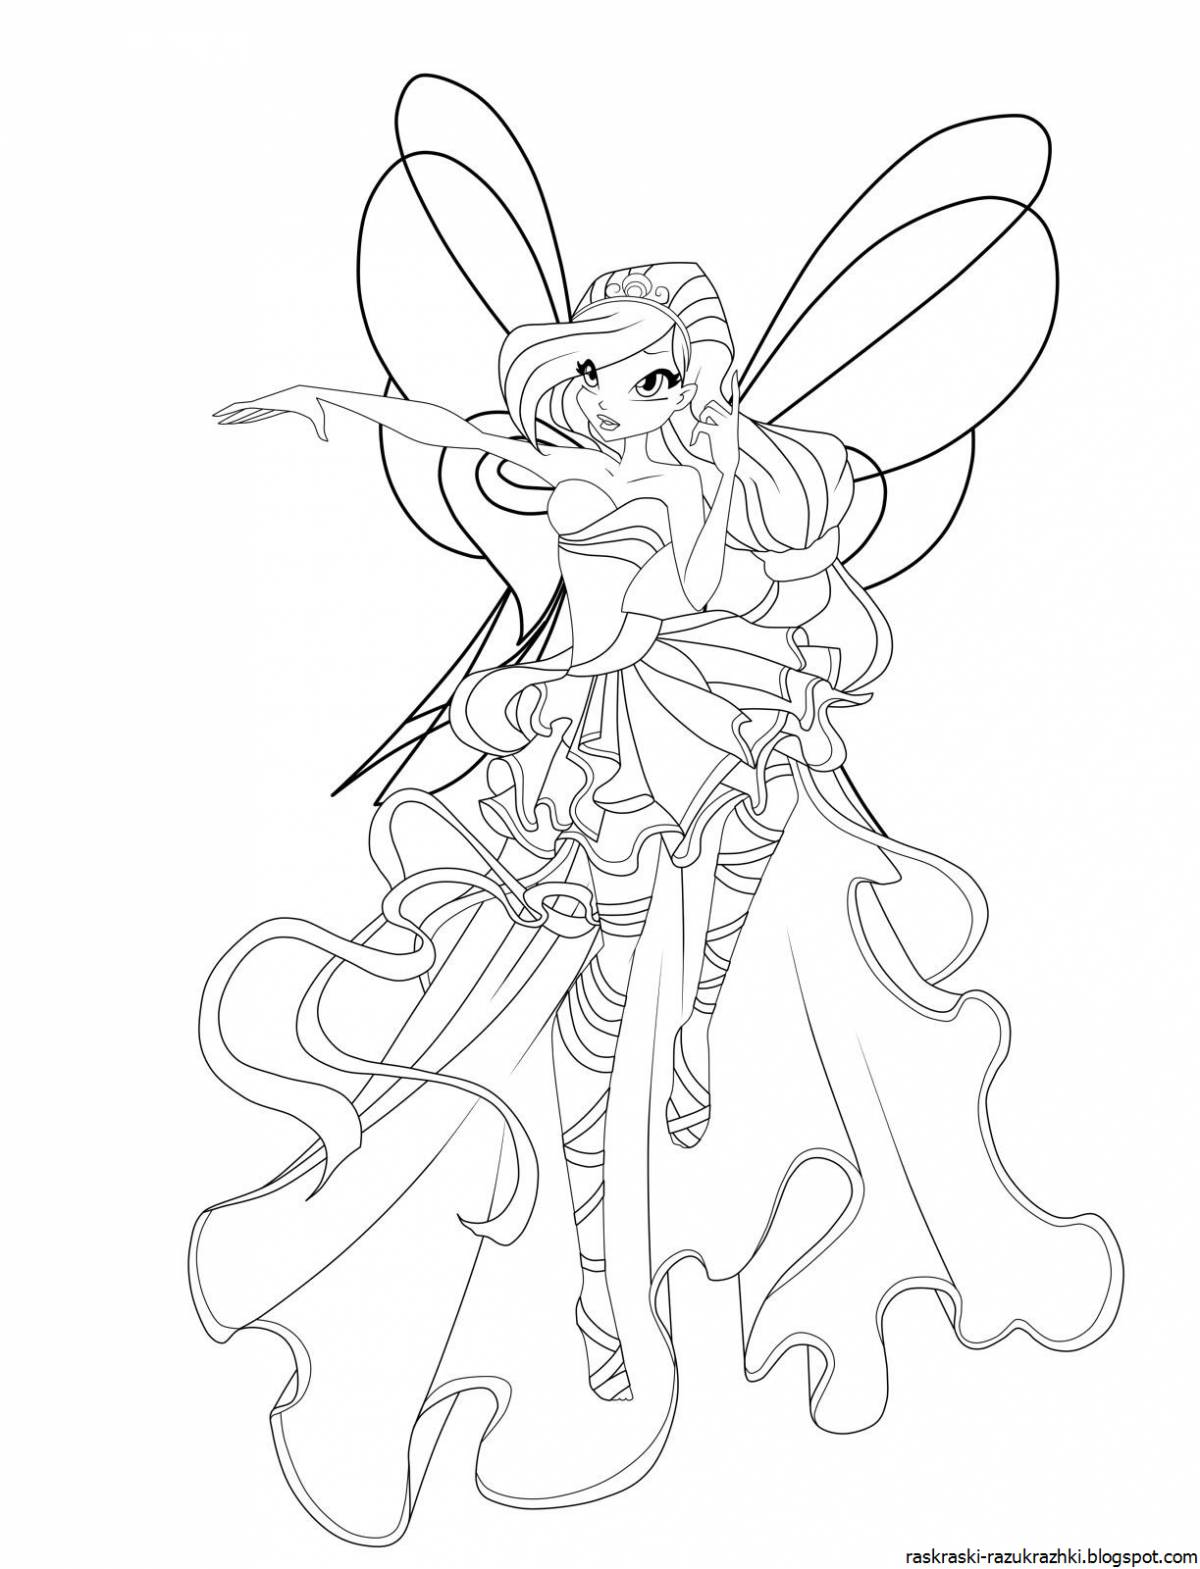 Colourful bloom winx coloring book